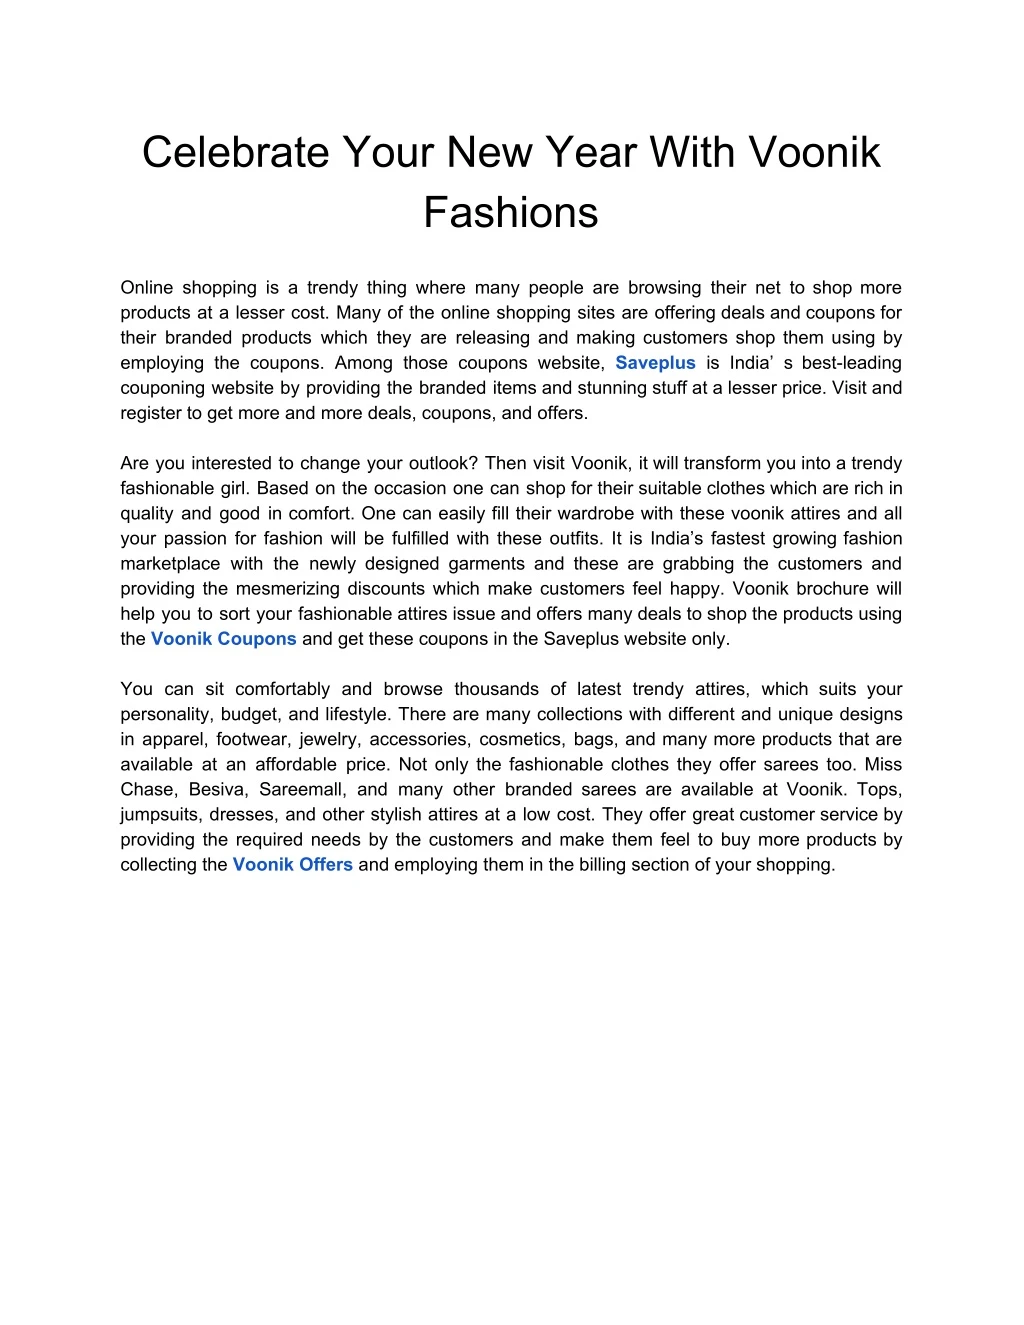 celebrate your new year with voonik fashions